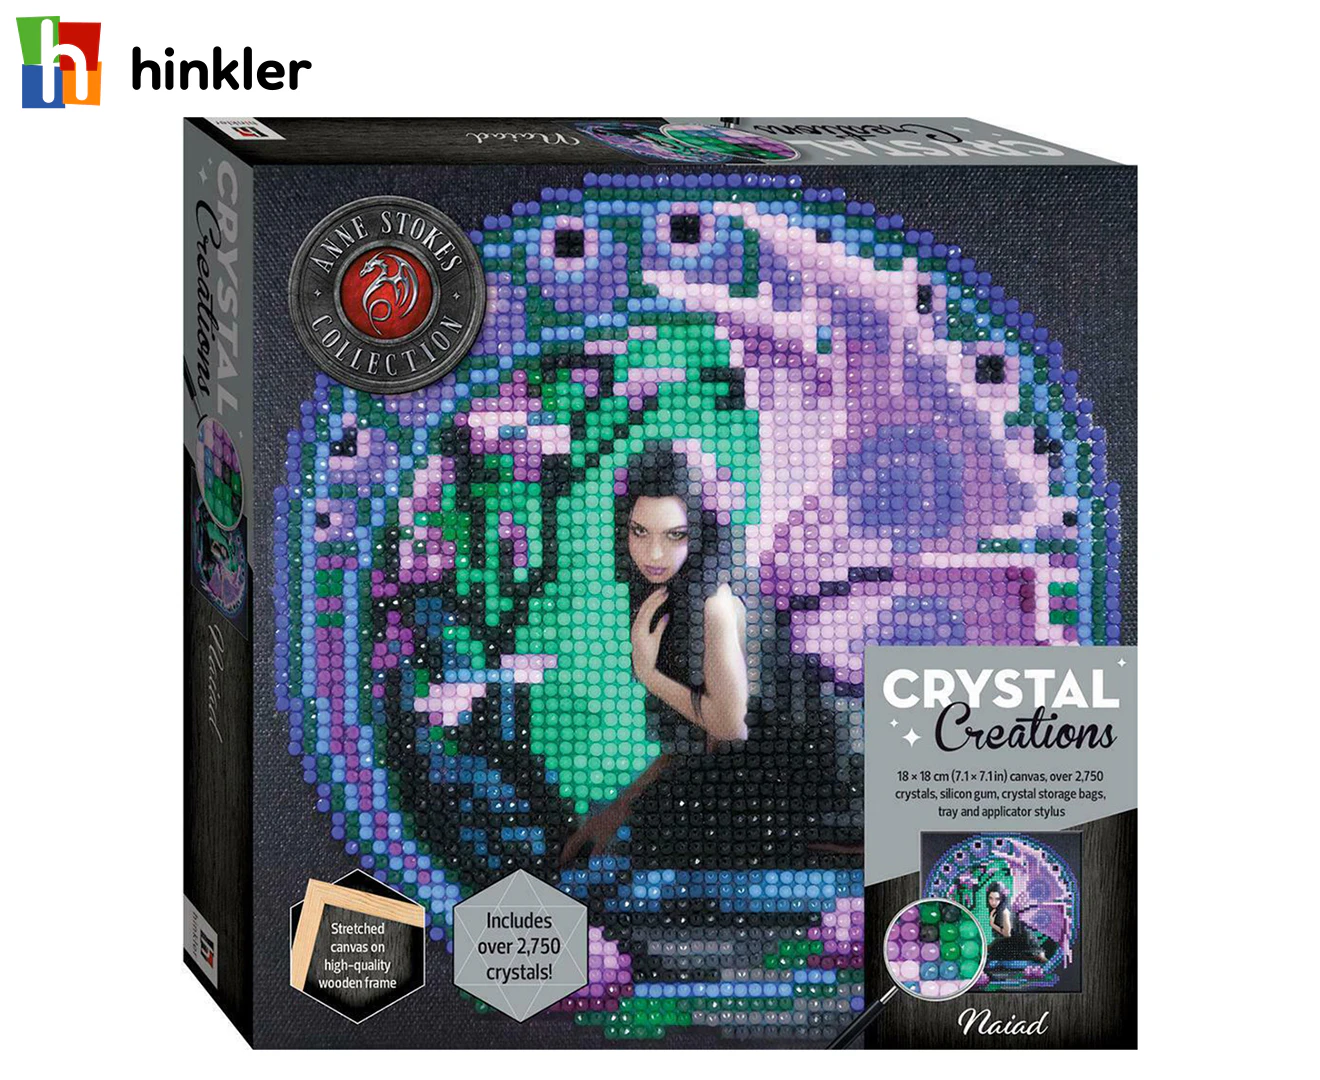 Hinkler Crystal Creations - Aldi — USA - Specials archive